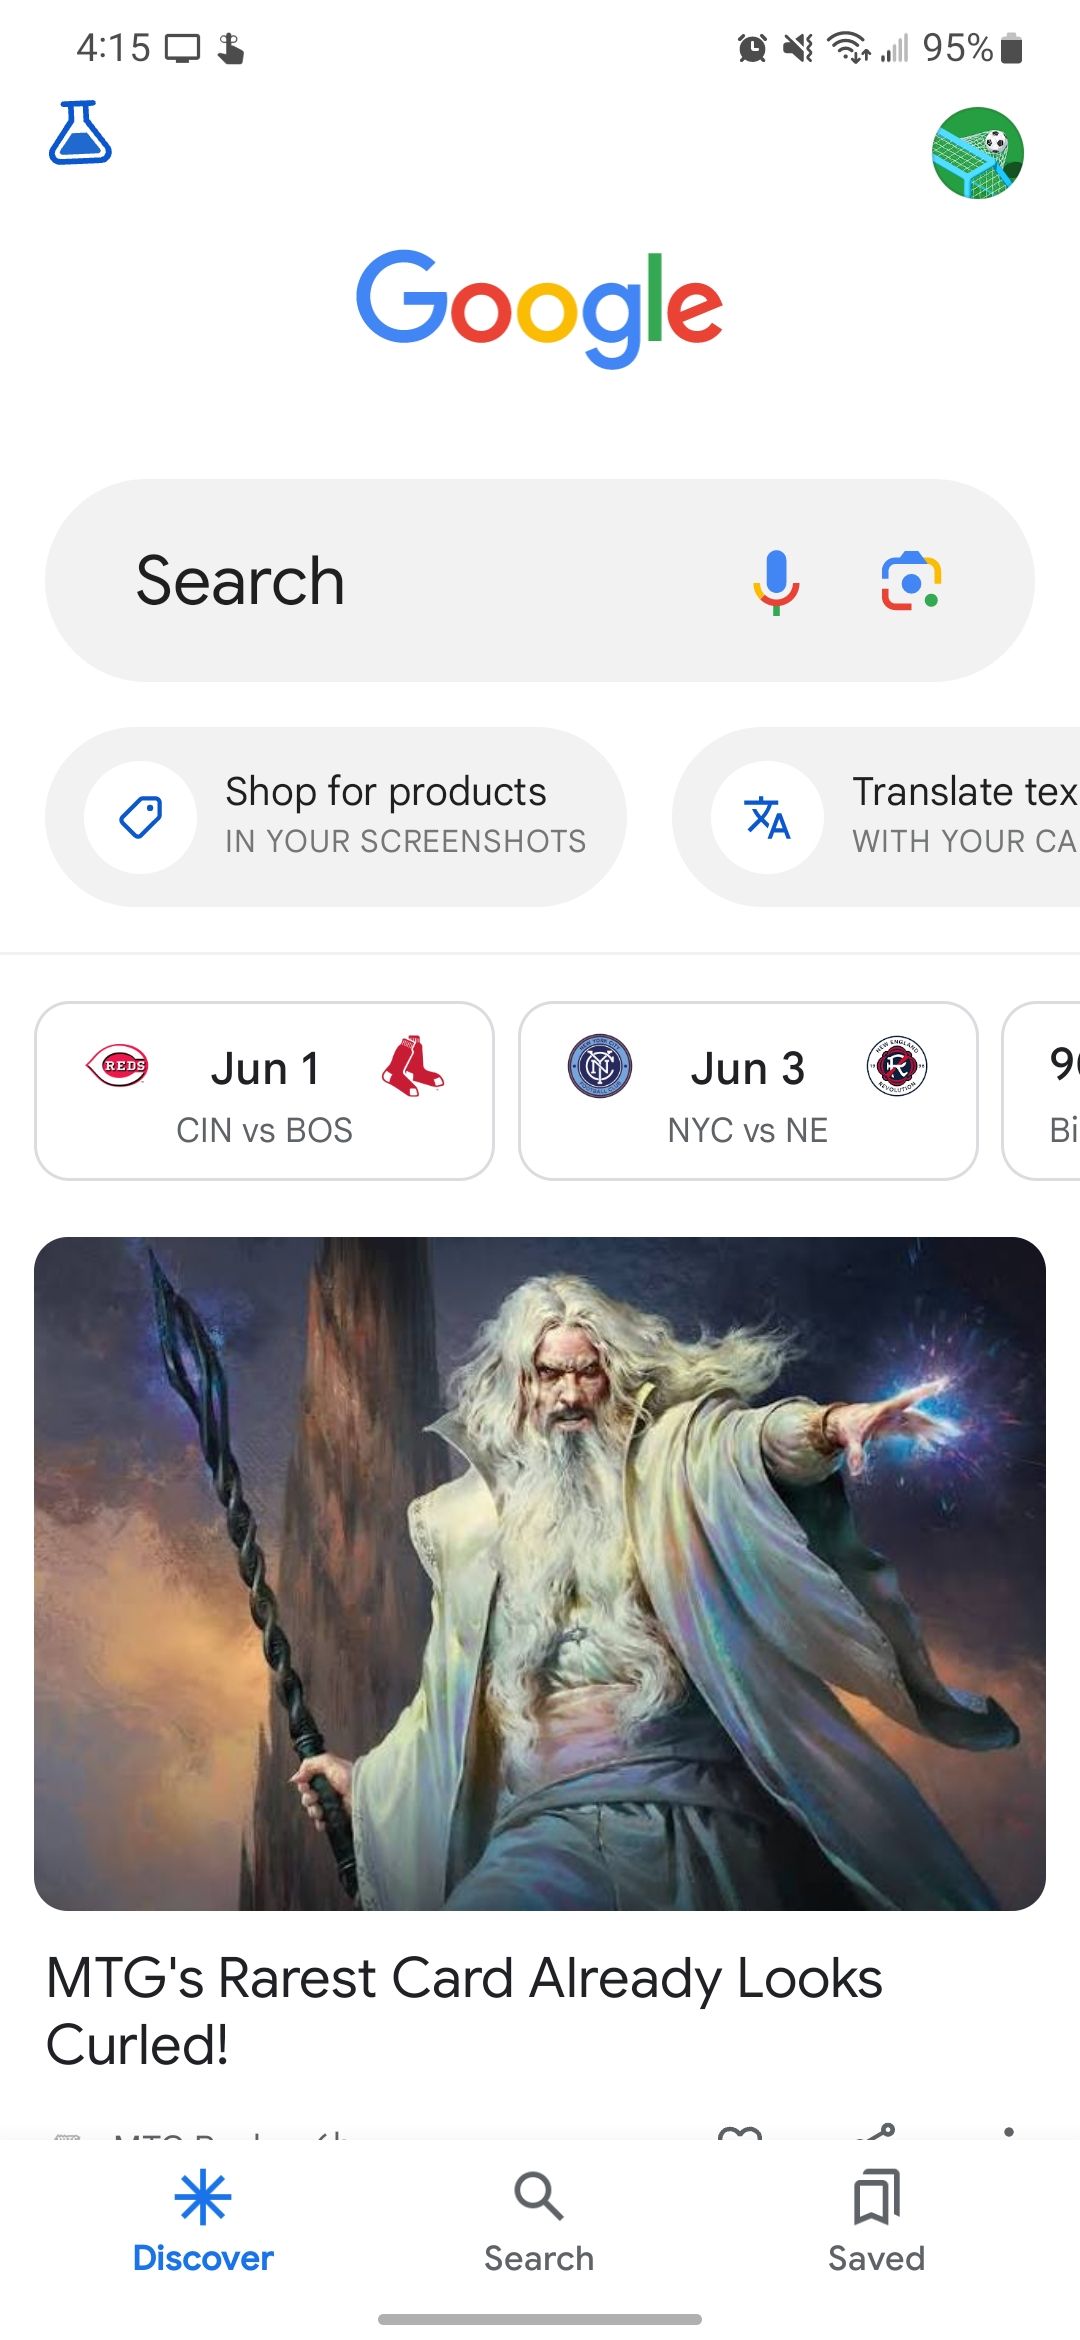 The Google app Discover tab